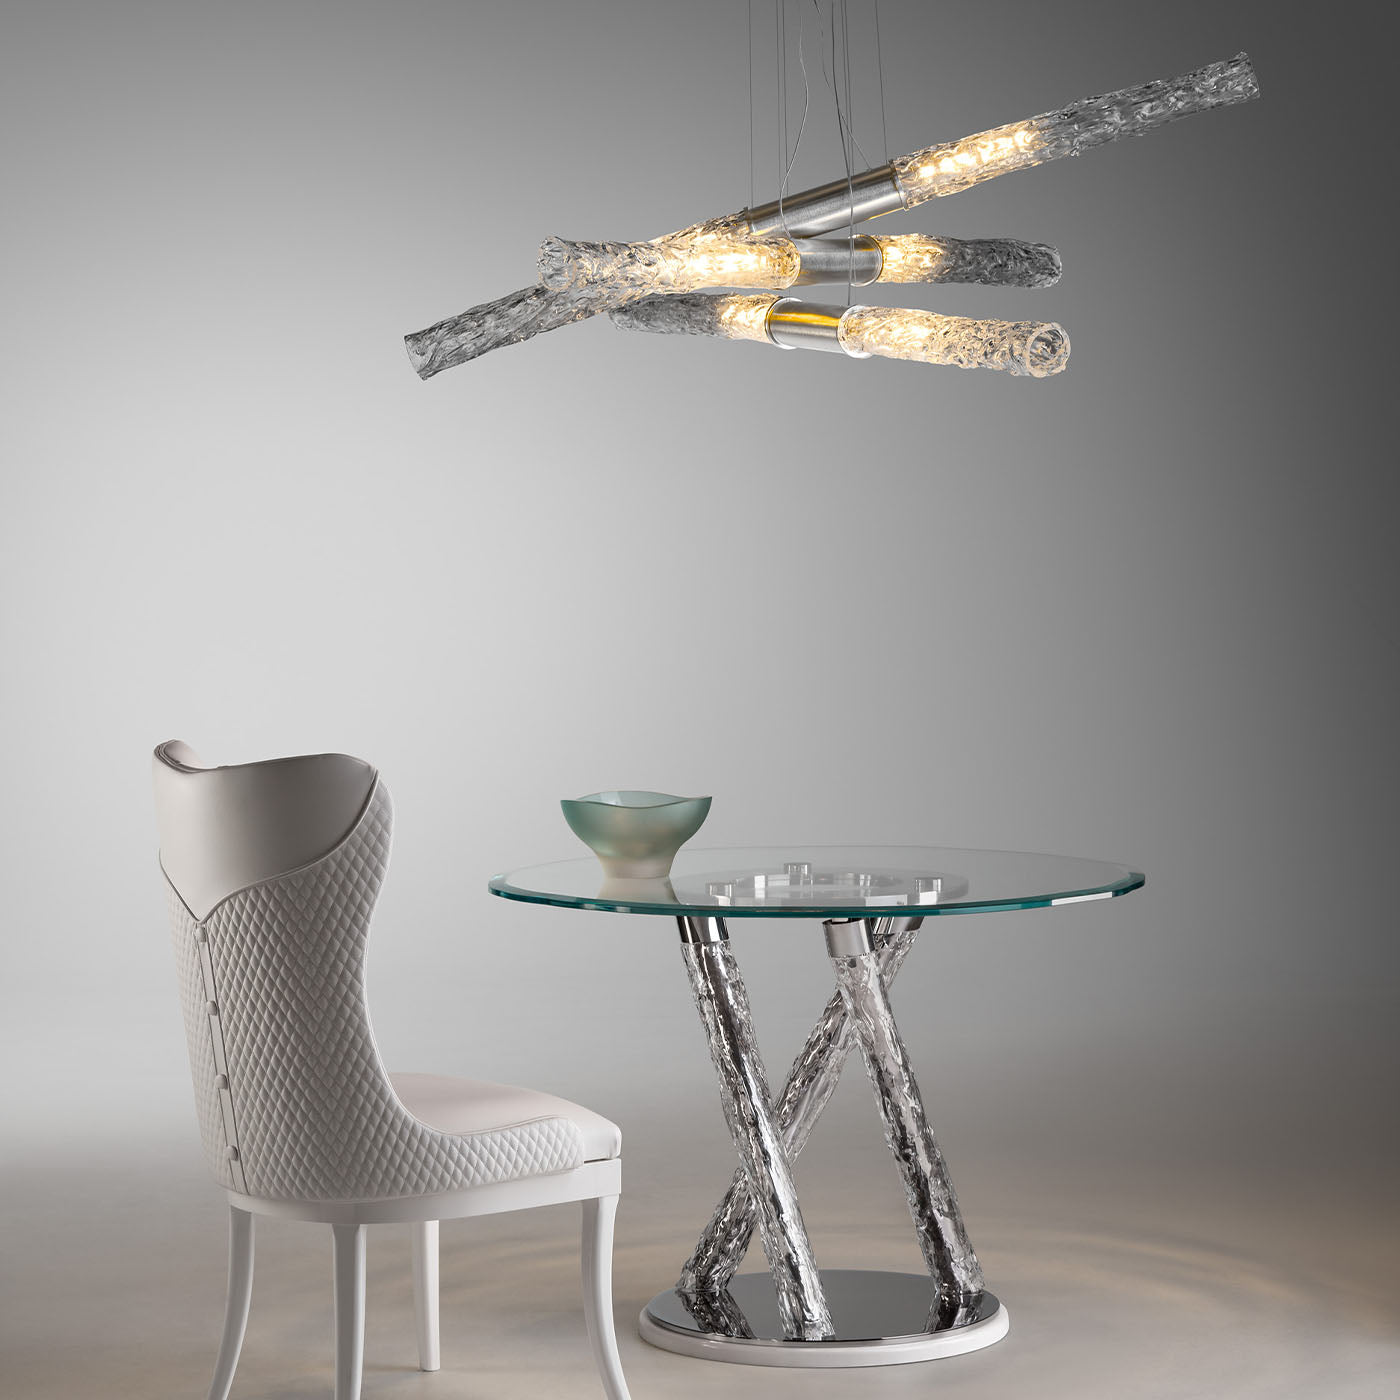 Glass Table With Circular Glass Top and Twisted Legs - Alternative view 1